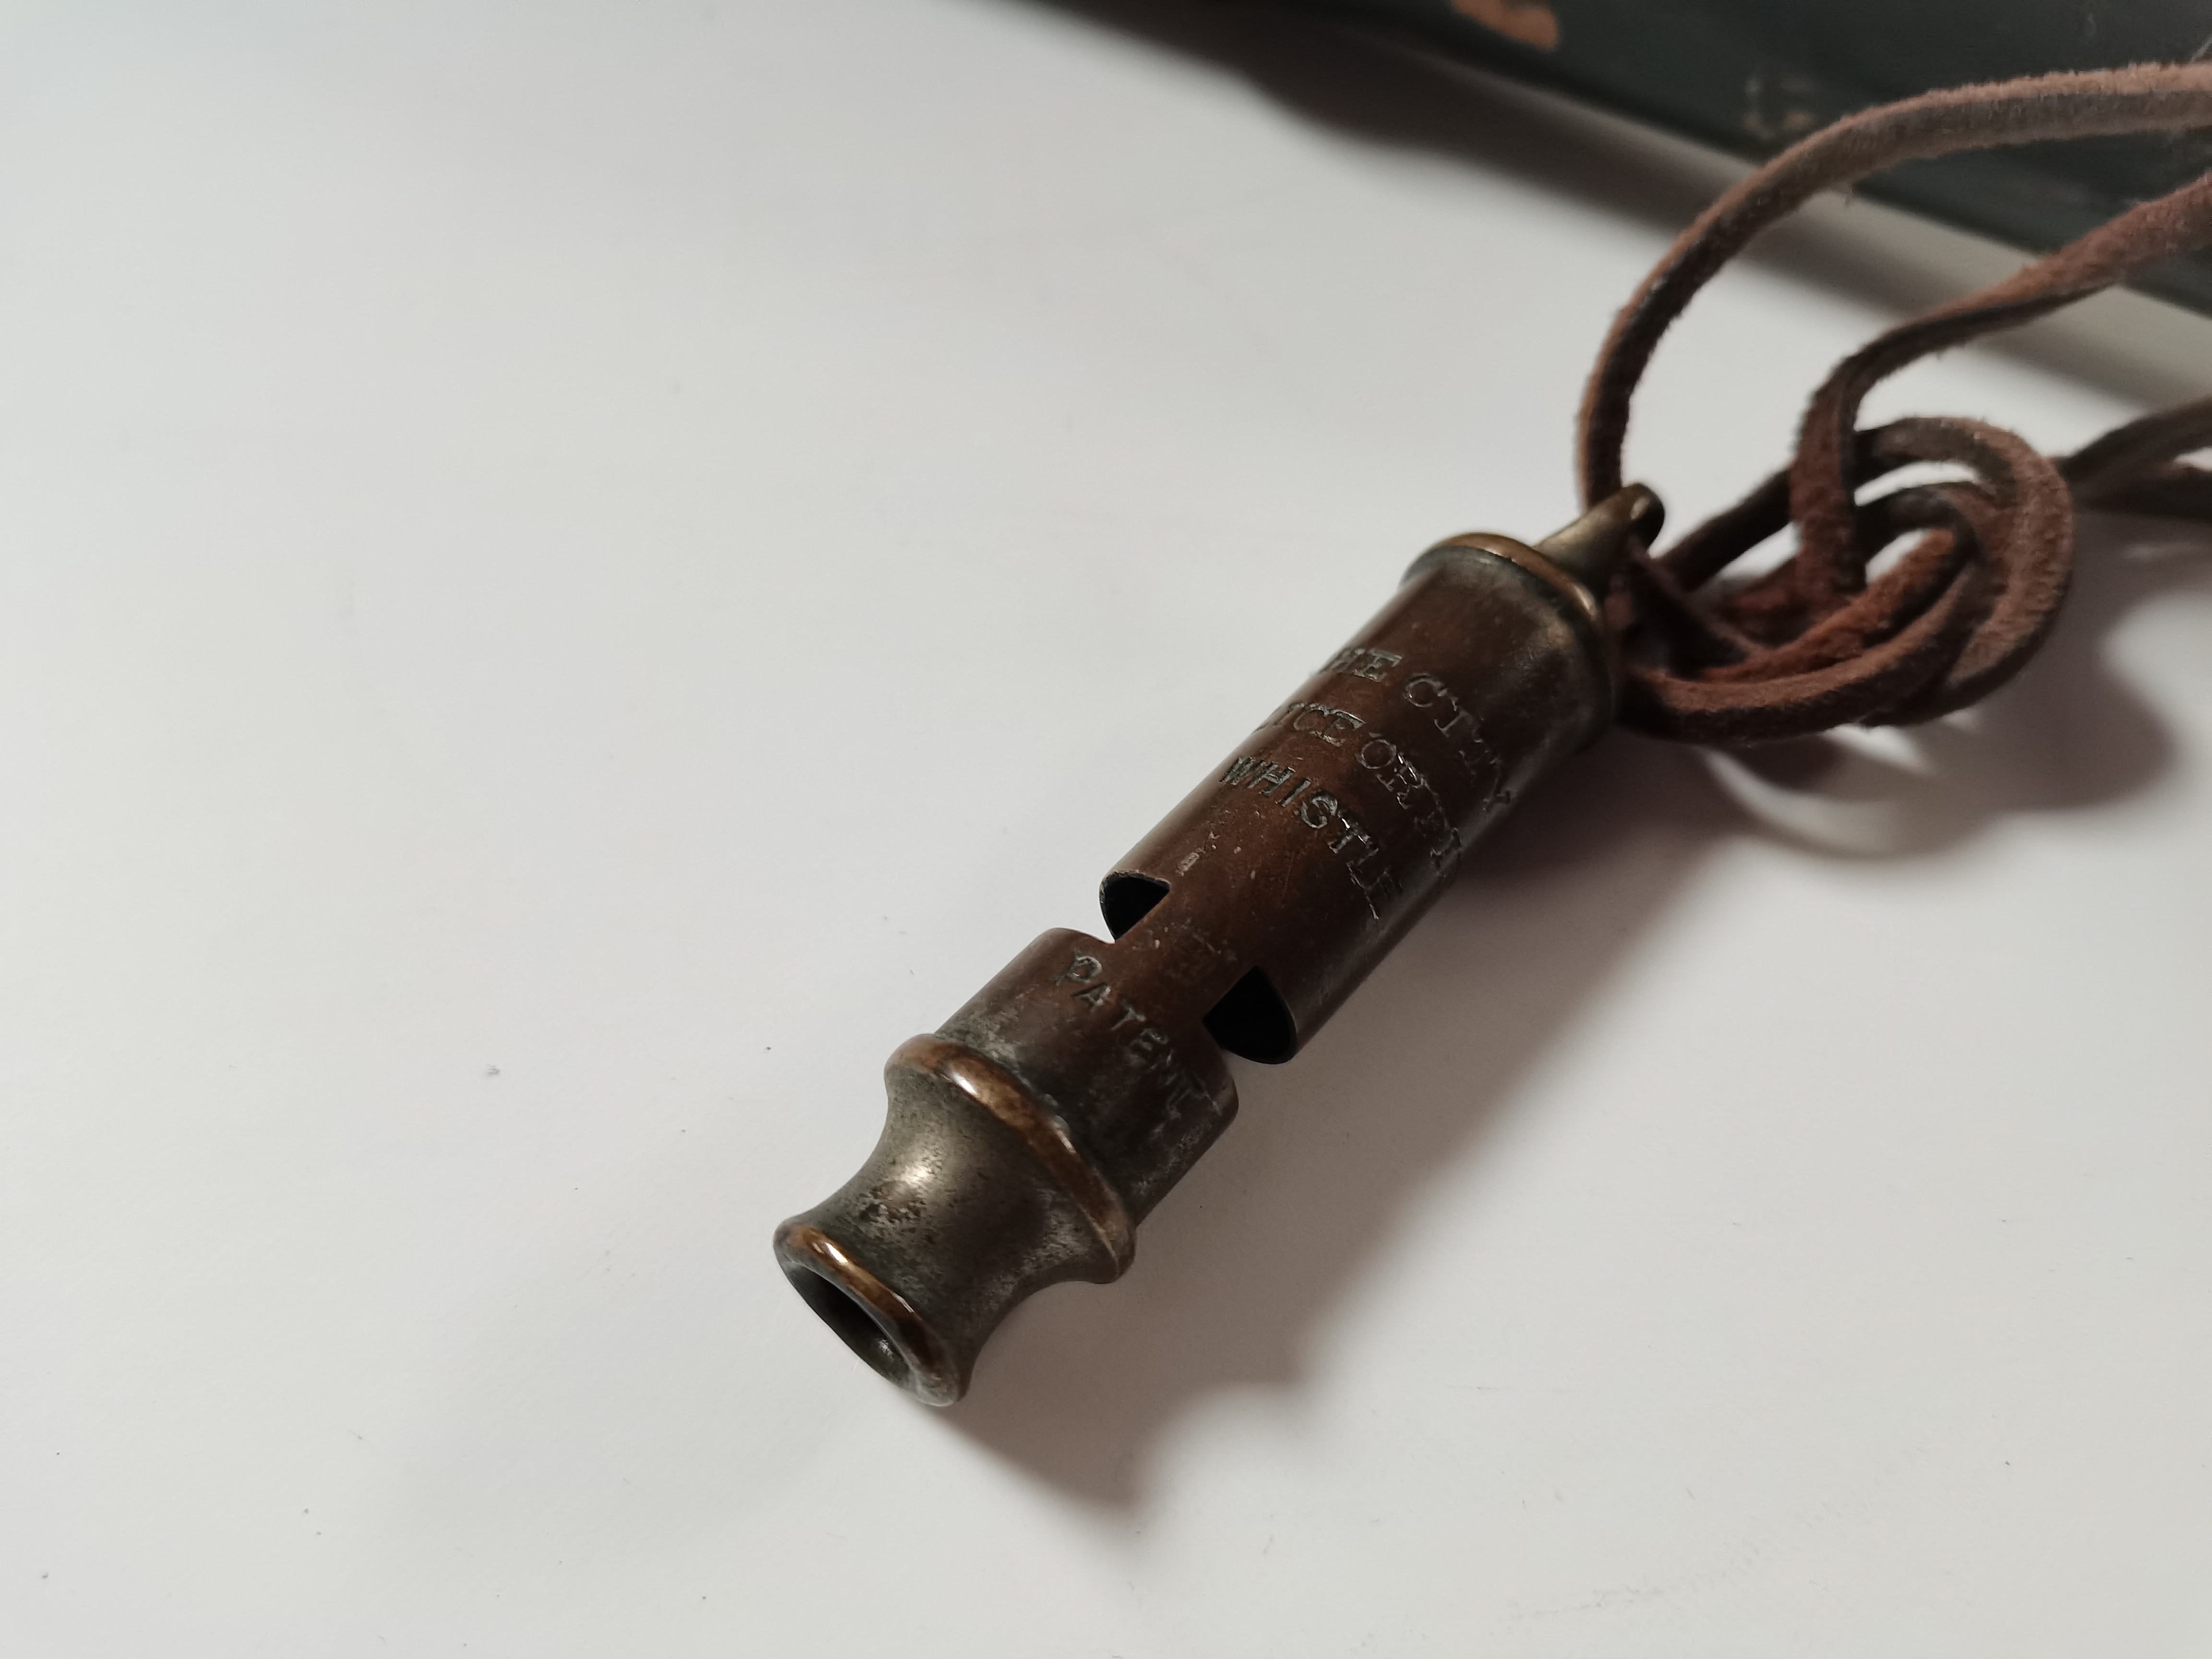 Victorian police trunchion and whistle - Image 2 of 3